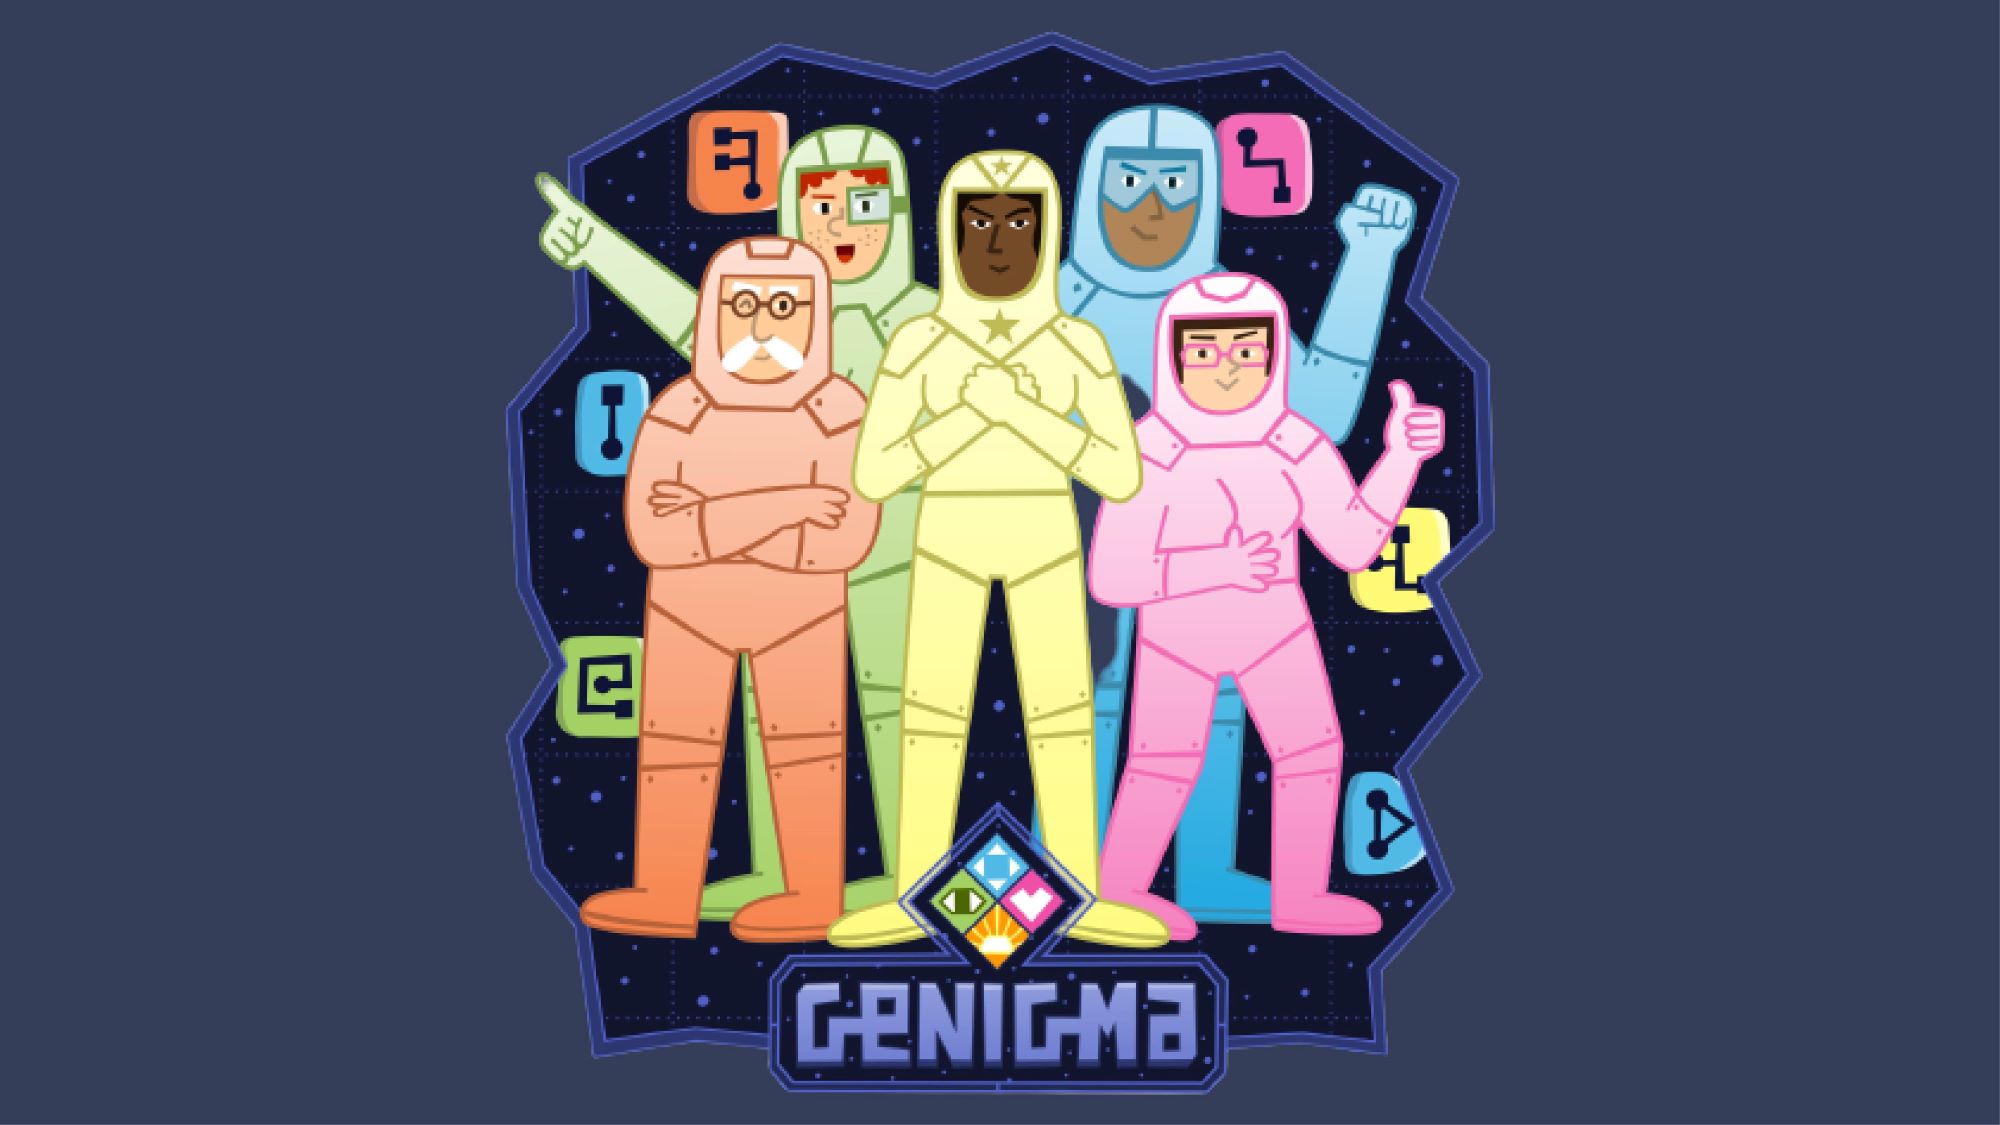 Genigma: the game that helps cancer research